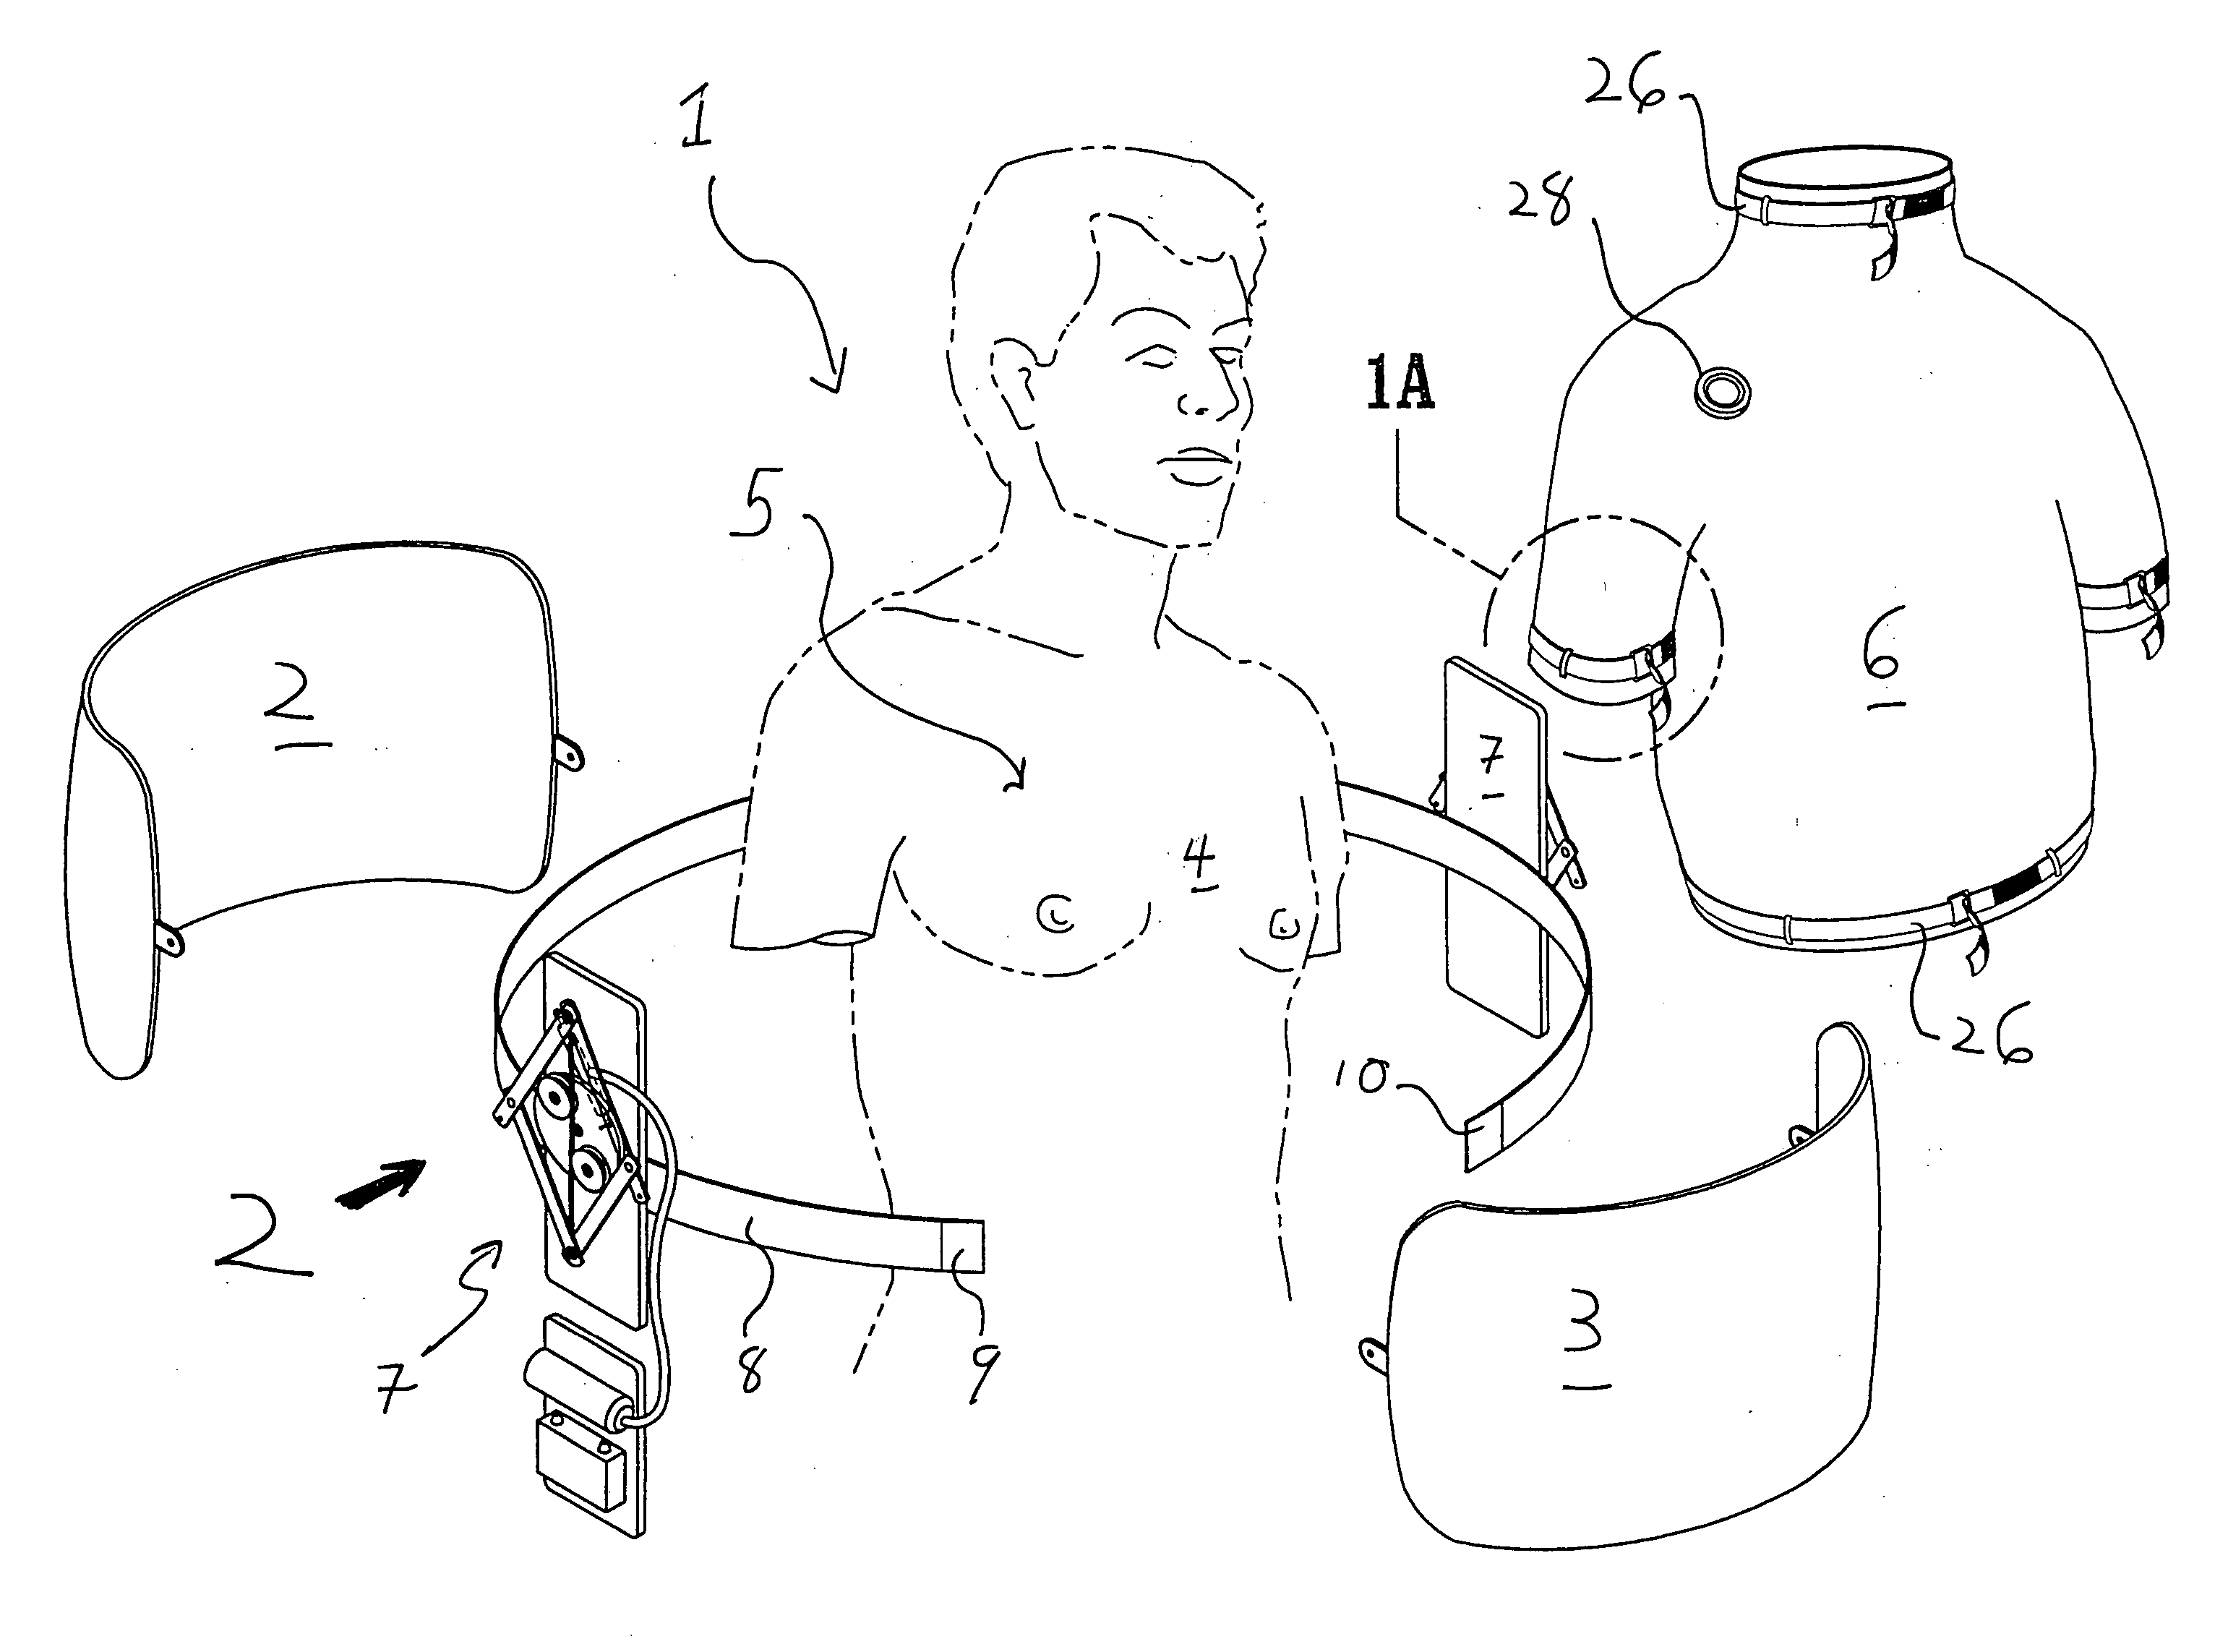 Apparatus for mechanically ventilating a patient